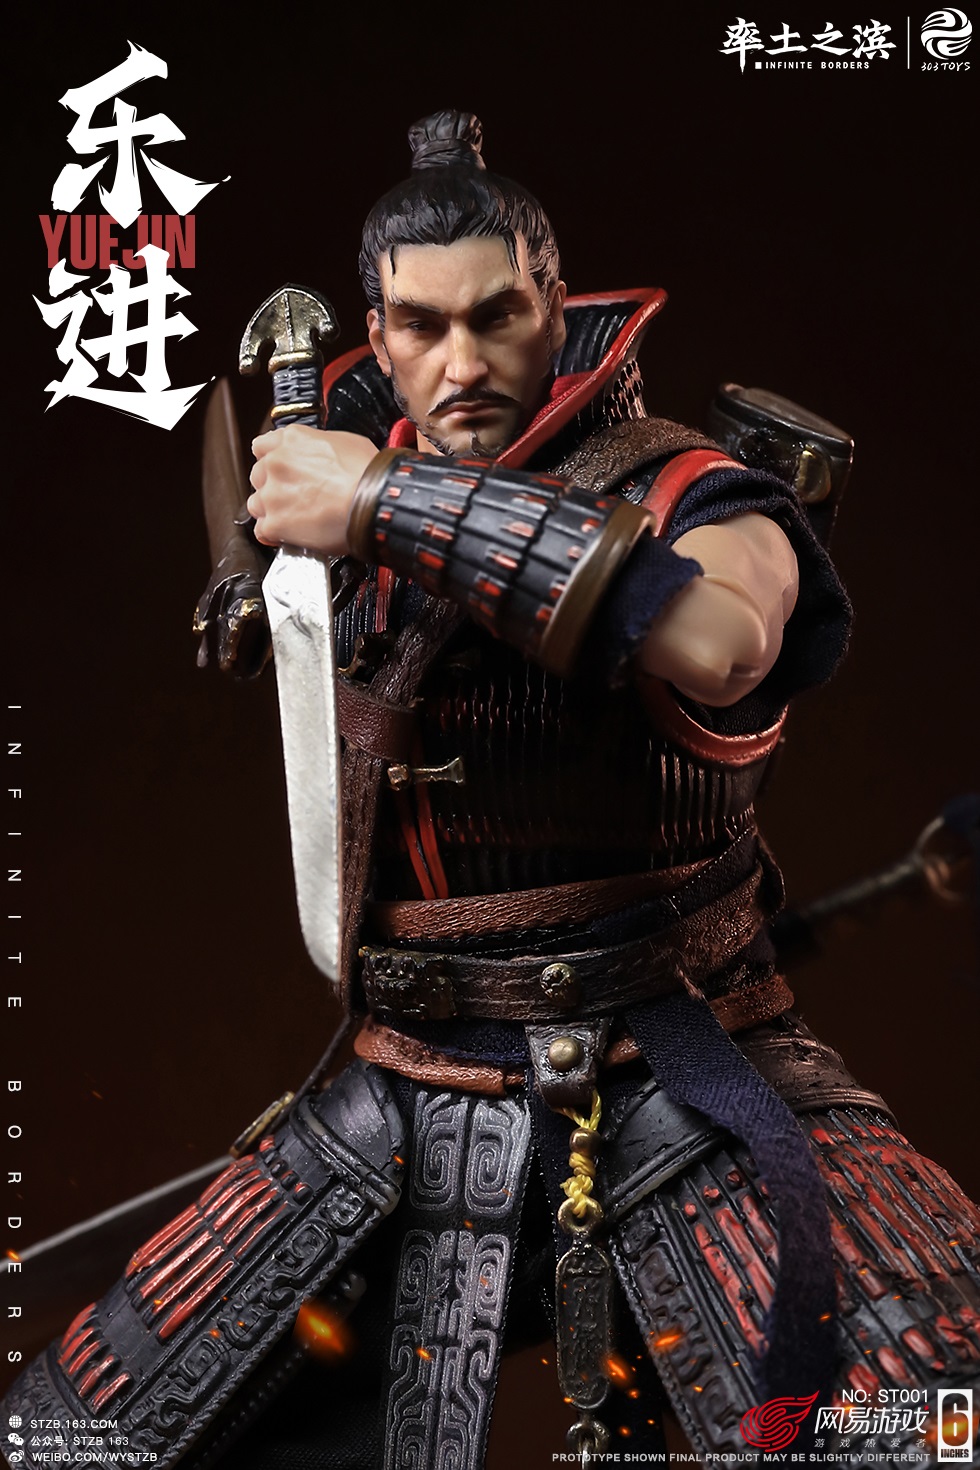 303TOYS - NEW PRODUCT: INFINITE BORDERS X 303TOYS 1/12 - The Five Sons of Elite Generals: Yue Jin ST001 07152